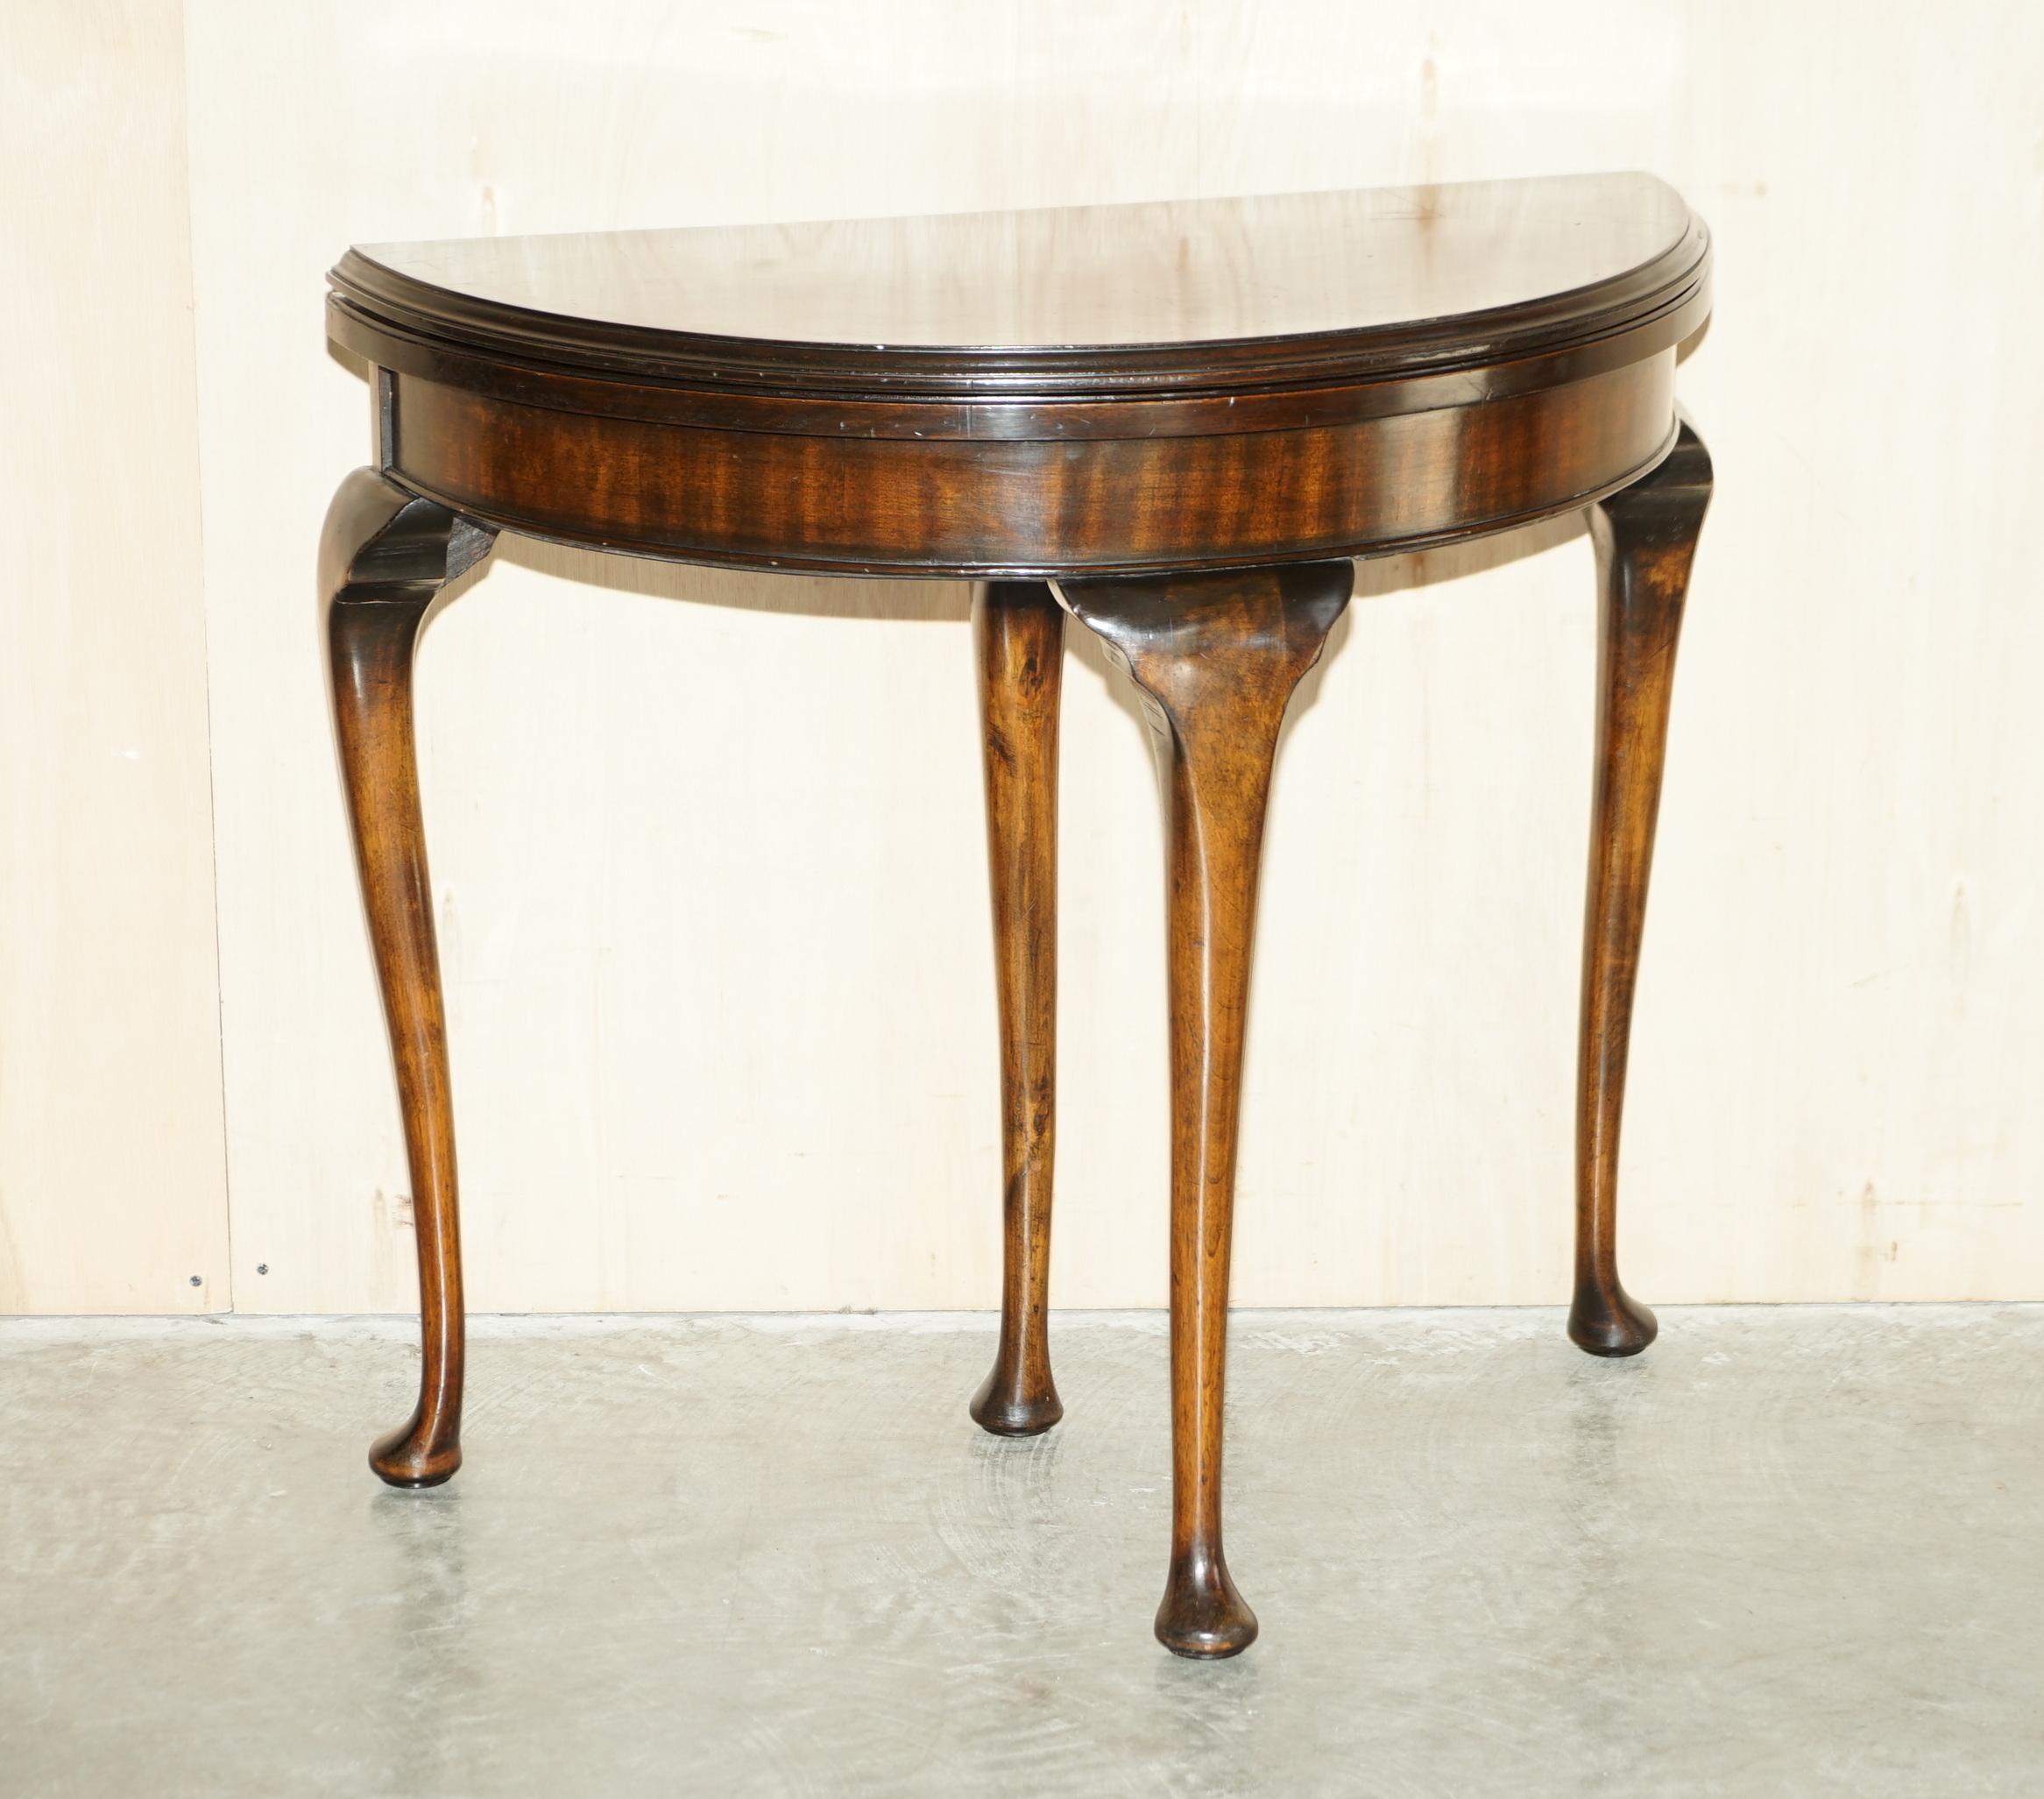 We are delighted to offer for sale this lovely circa 1880 flamed mahogany demi lune games card table with ornately carved legs

A very good looking and well made piece, made in the Regency style however it is late Victorian. The legs are